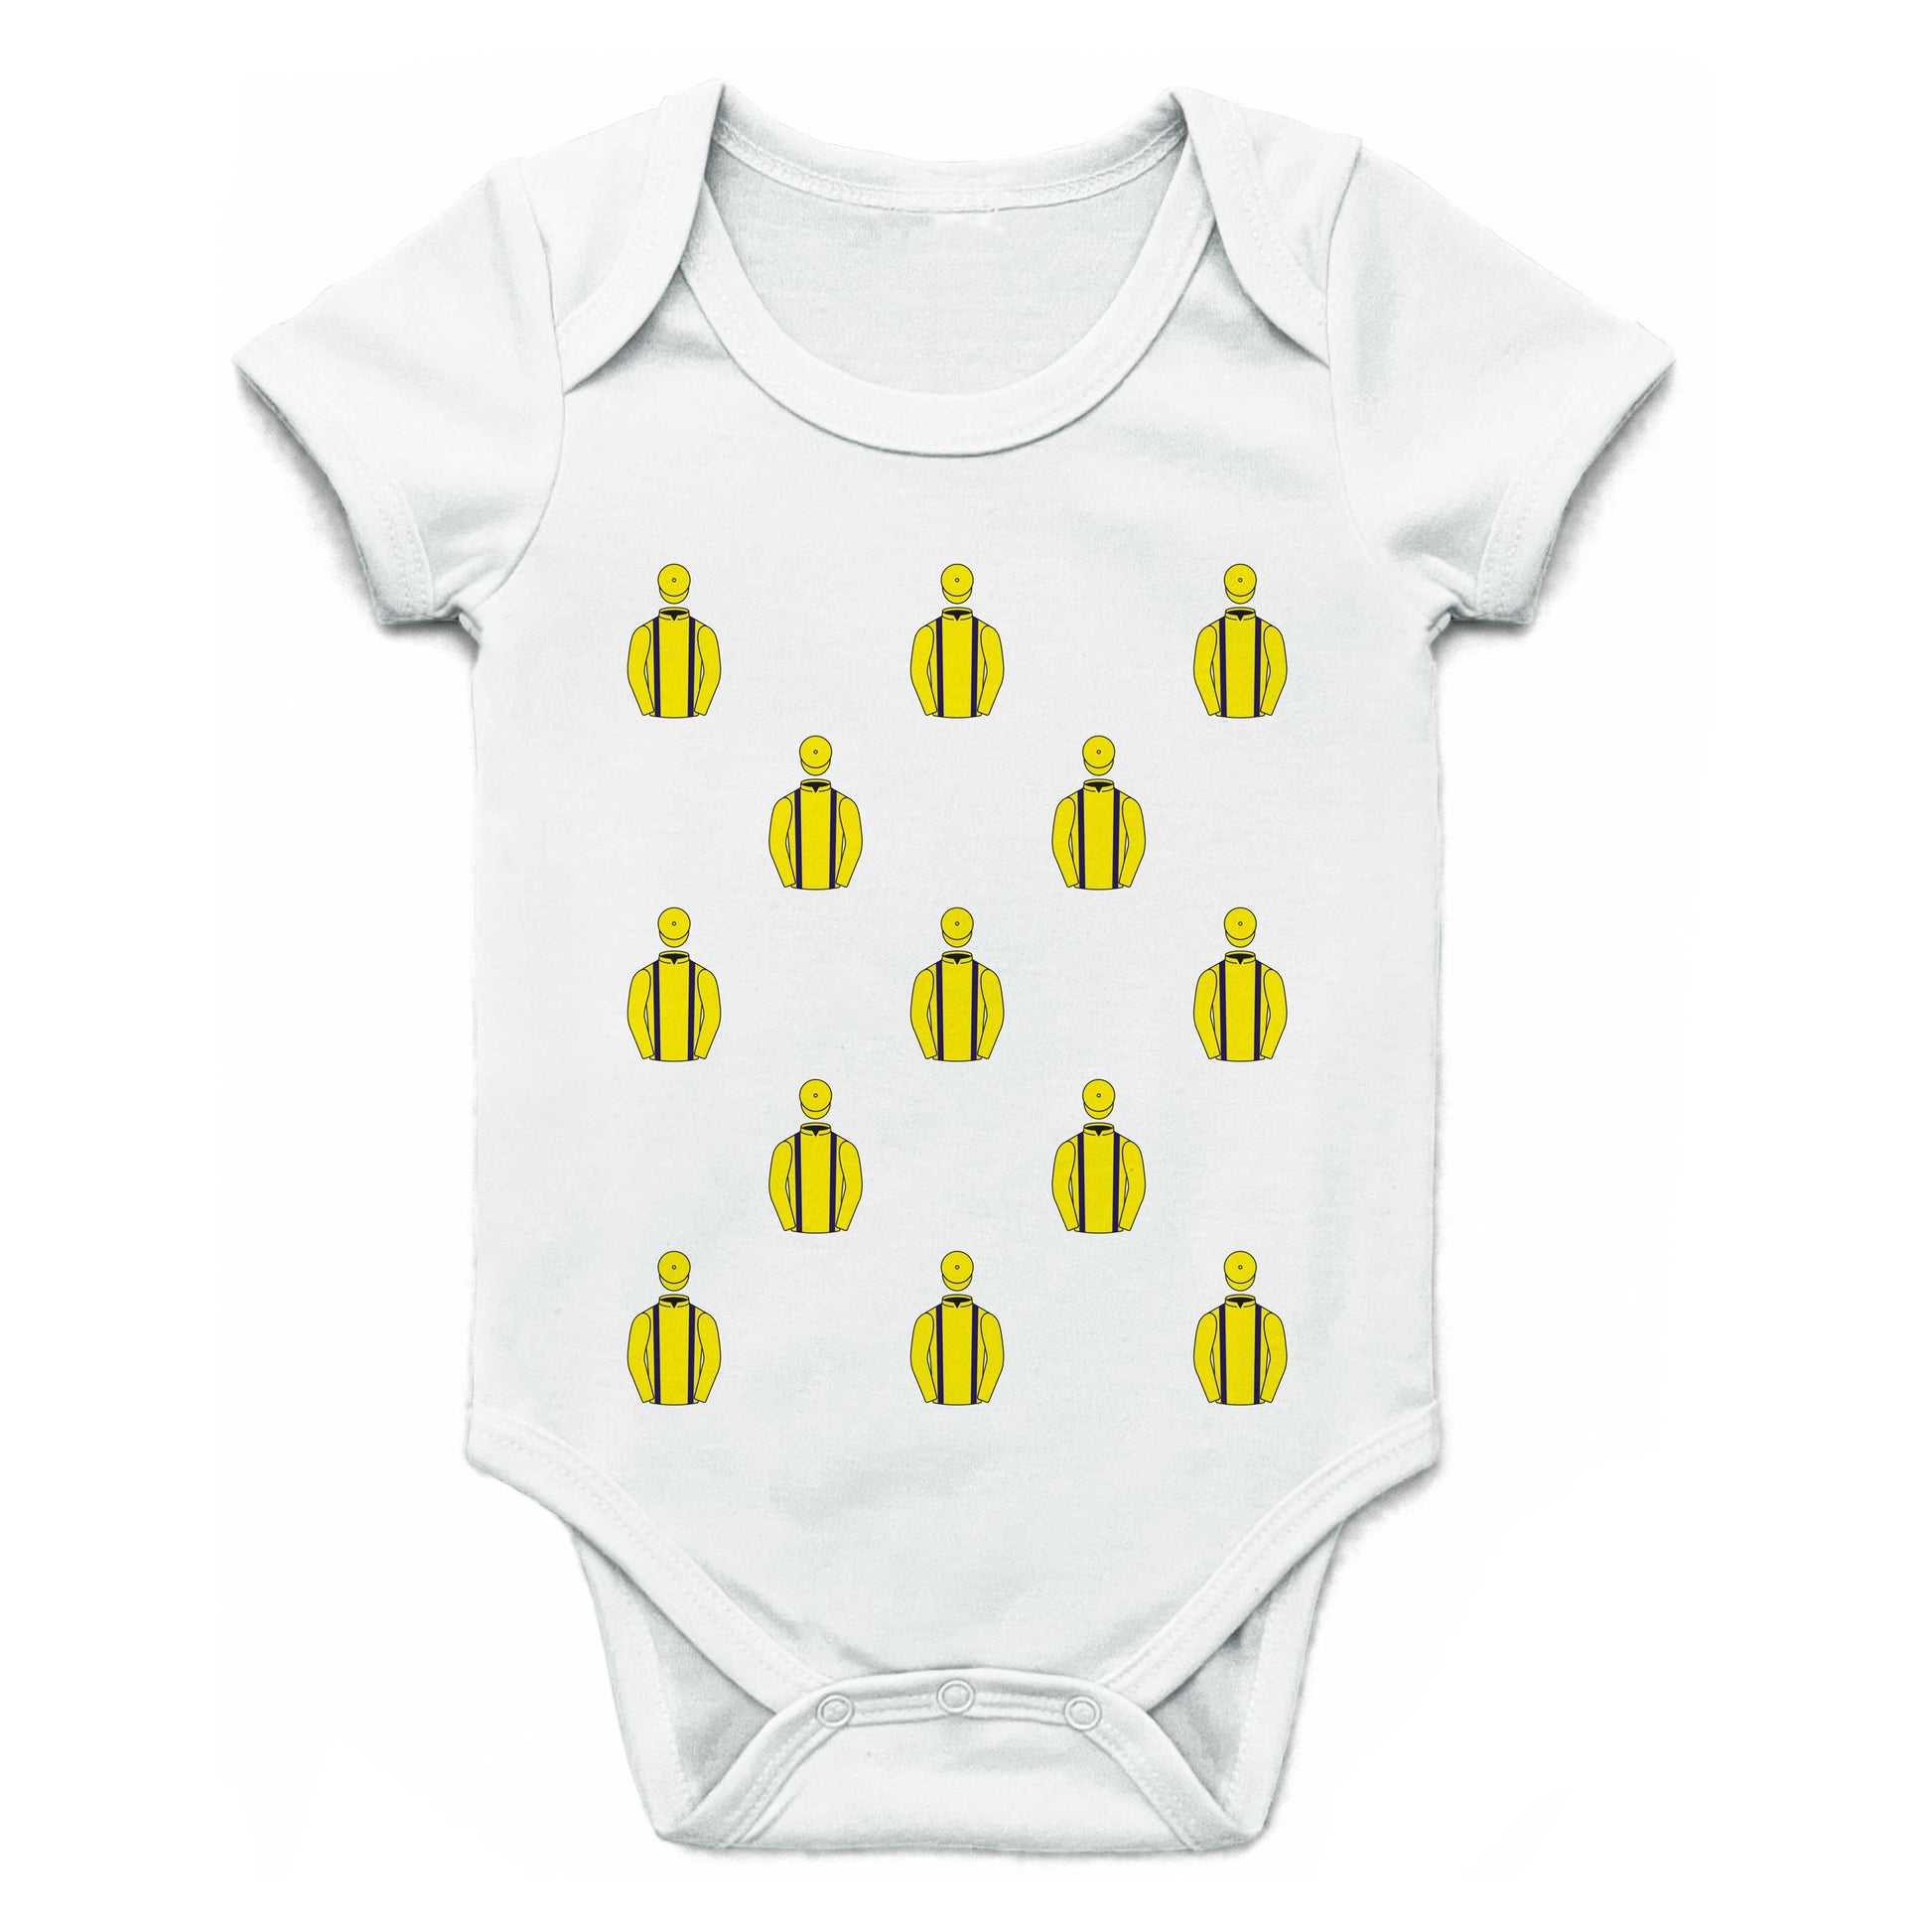 Taylor And O'Dwyer Multiple Silks Baby Grow - Baby Grow - Hacked Up